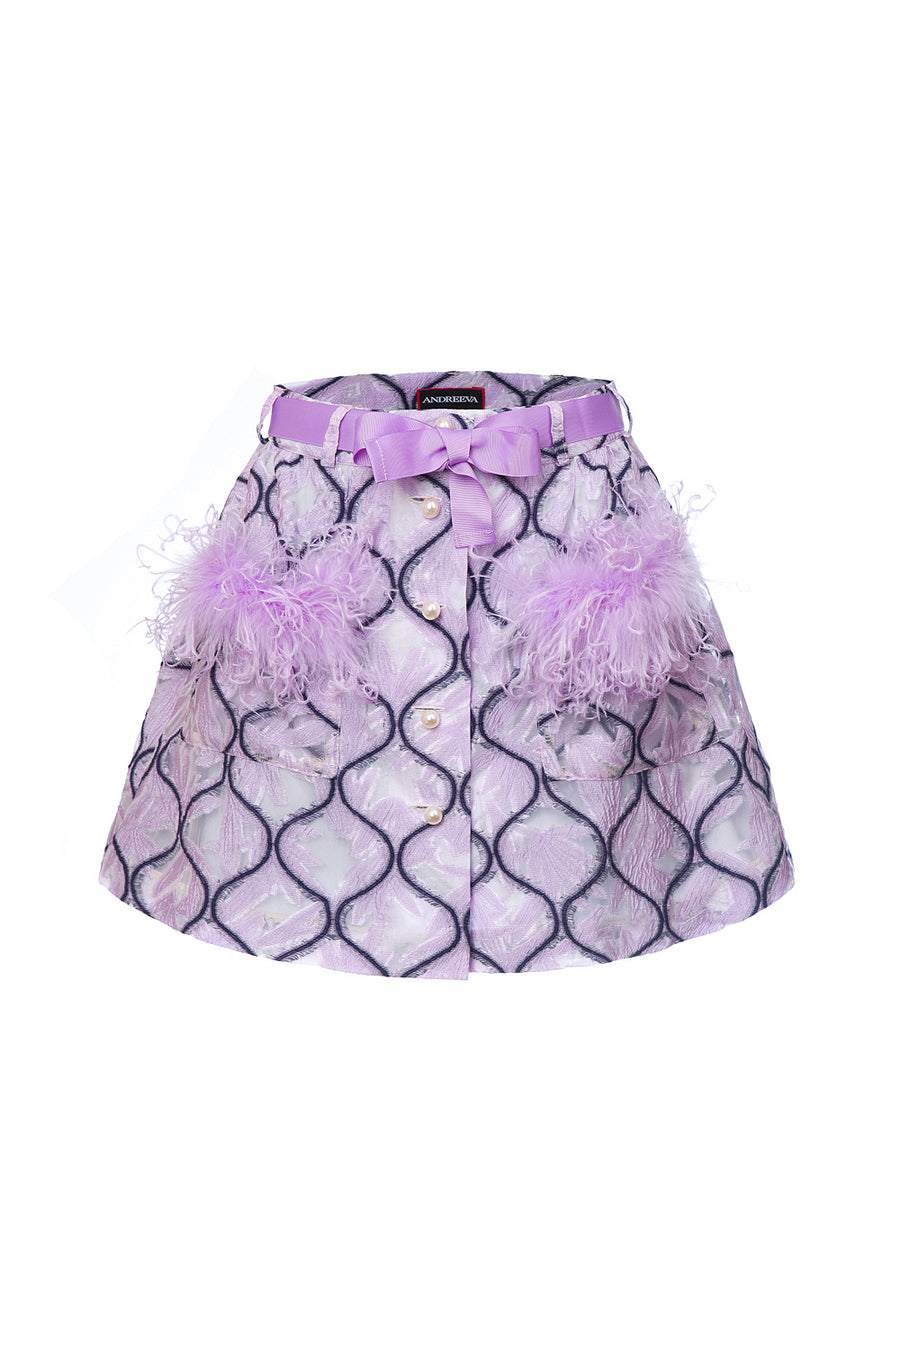 andreeva lavender skirt with feathers